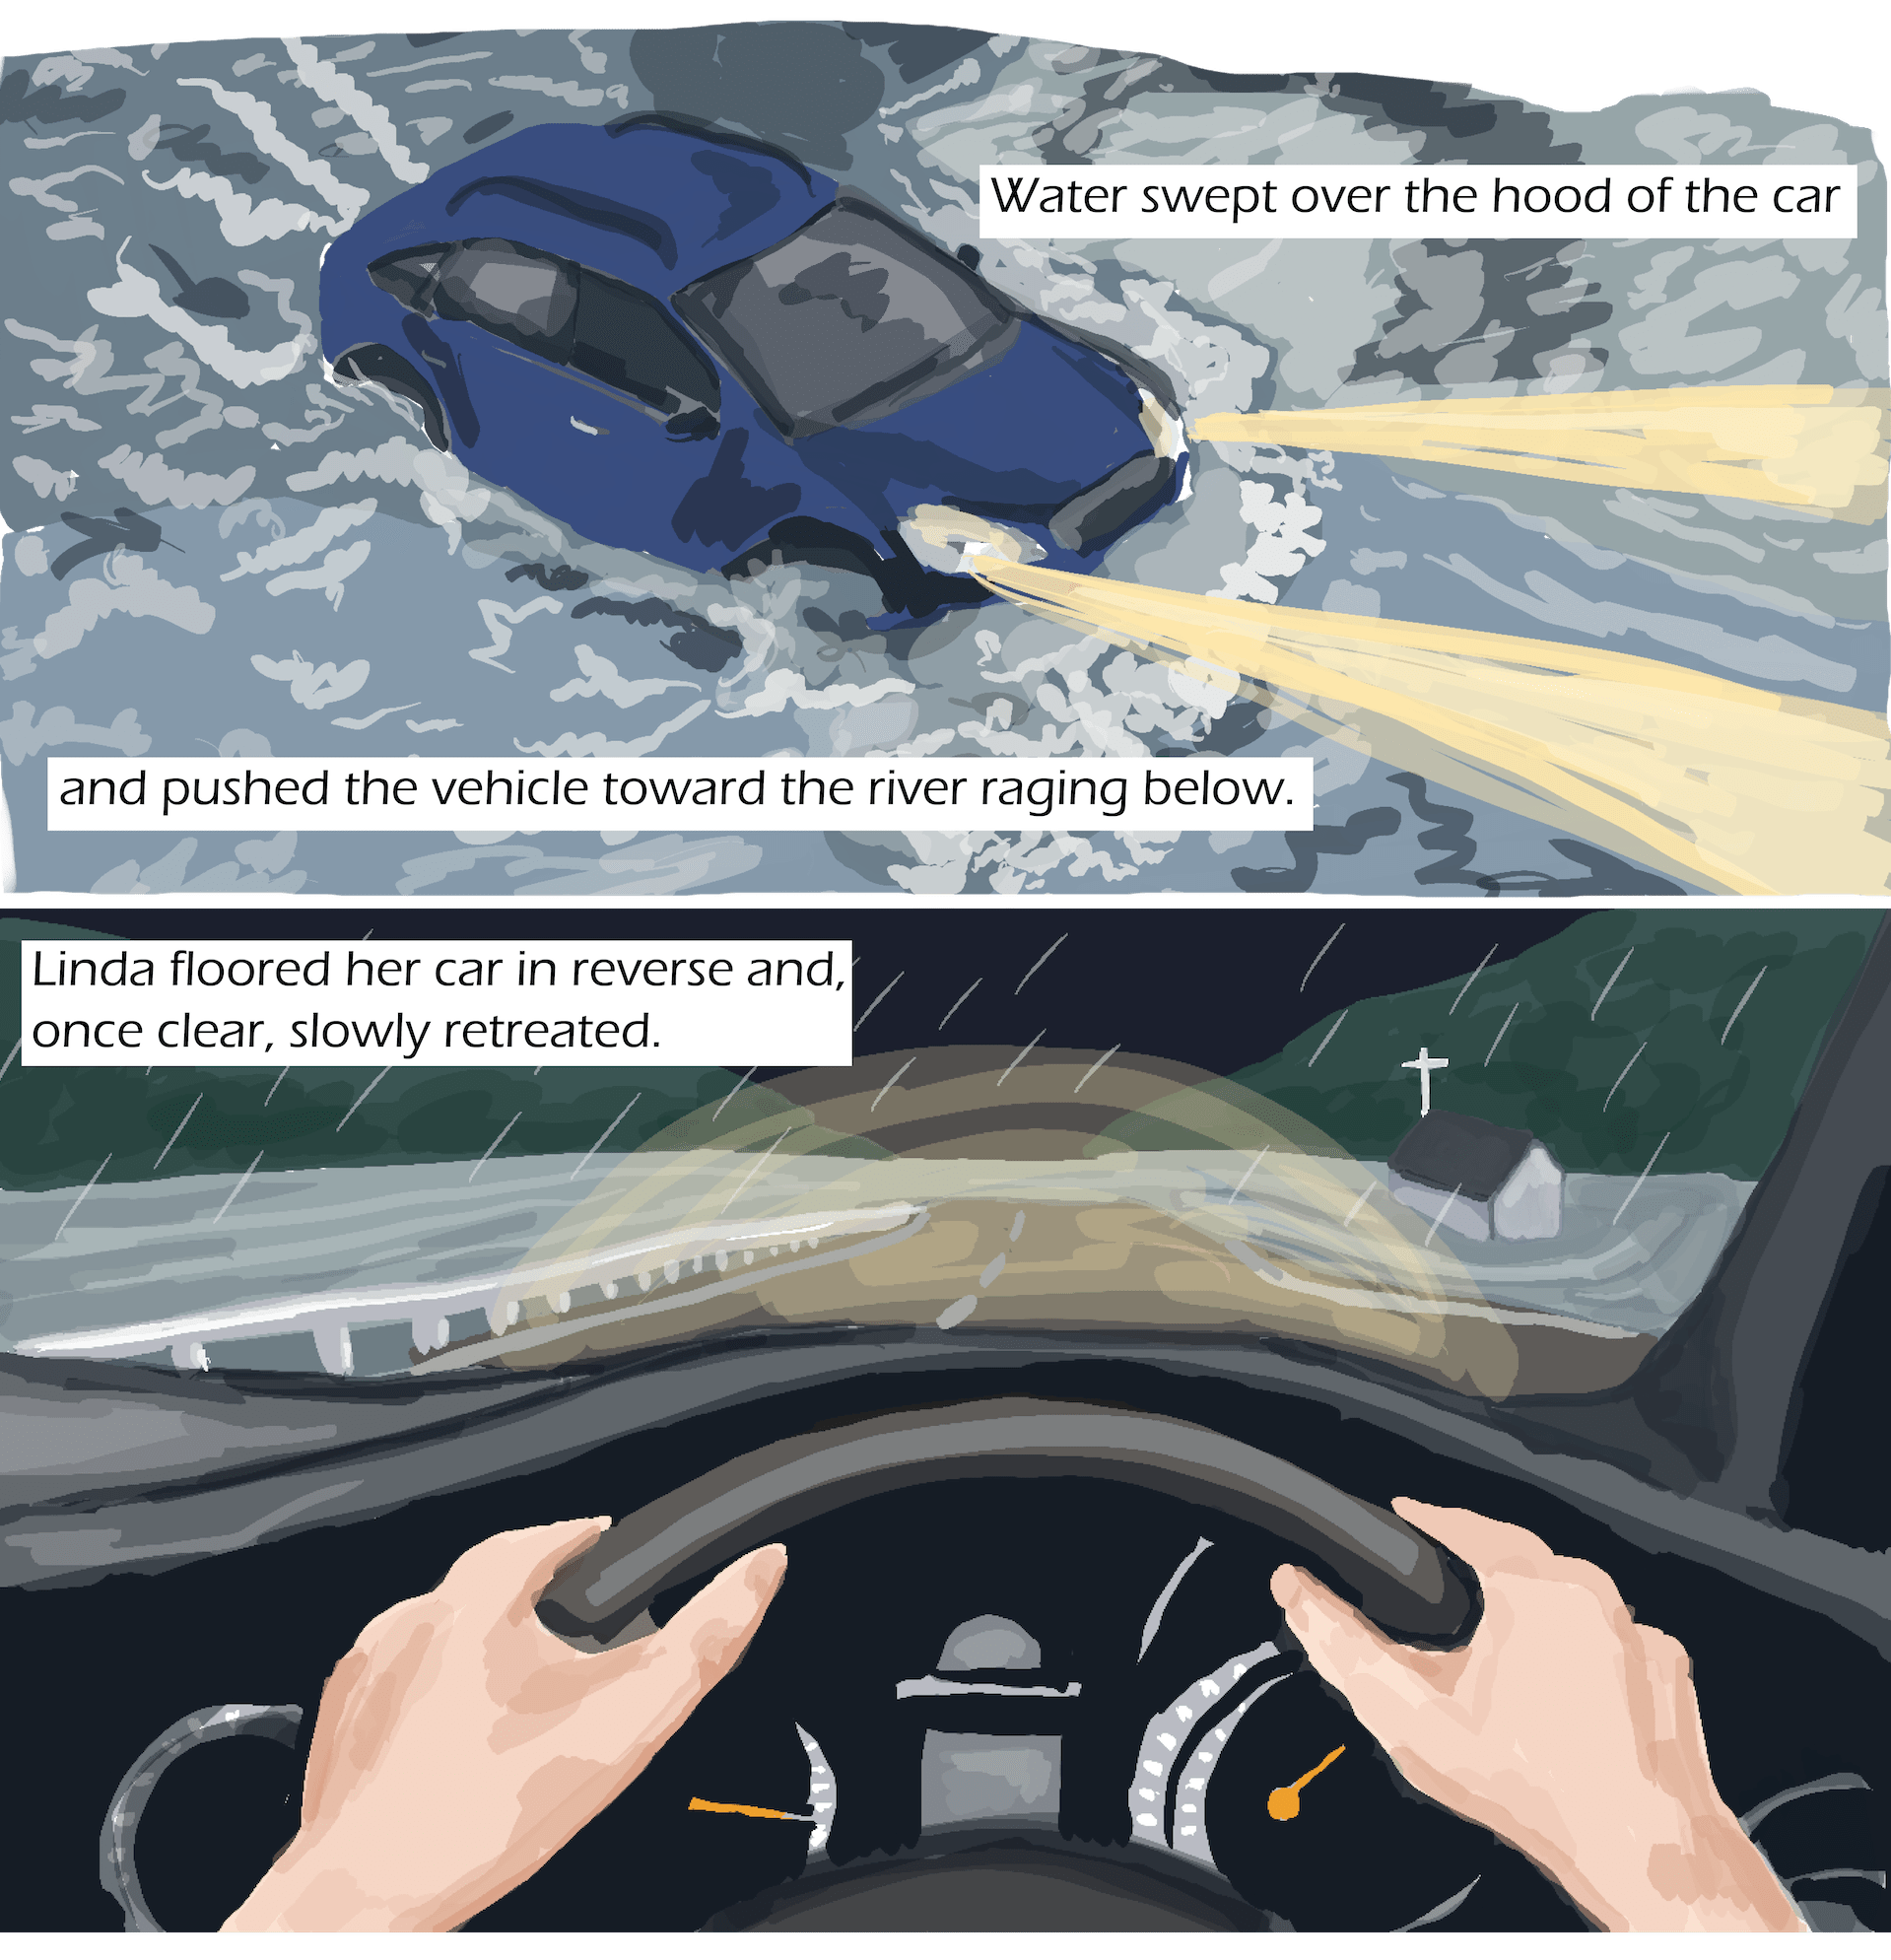 top image: A blue car wit headlights on drives through water that goes up to the middle of the doors. Text: Water swept over the hood of the car and pushed the vehicle toward the river raging below. Bottom image: hands on a steering wheel. The road can be seen through the windshield. Text: Linda floored her car in reverse and, once clear, slowly retreated